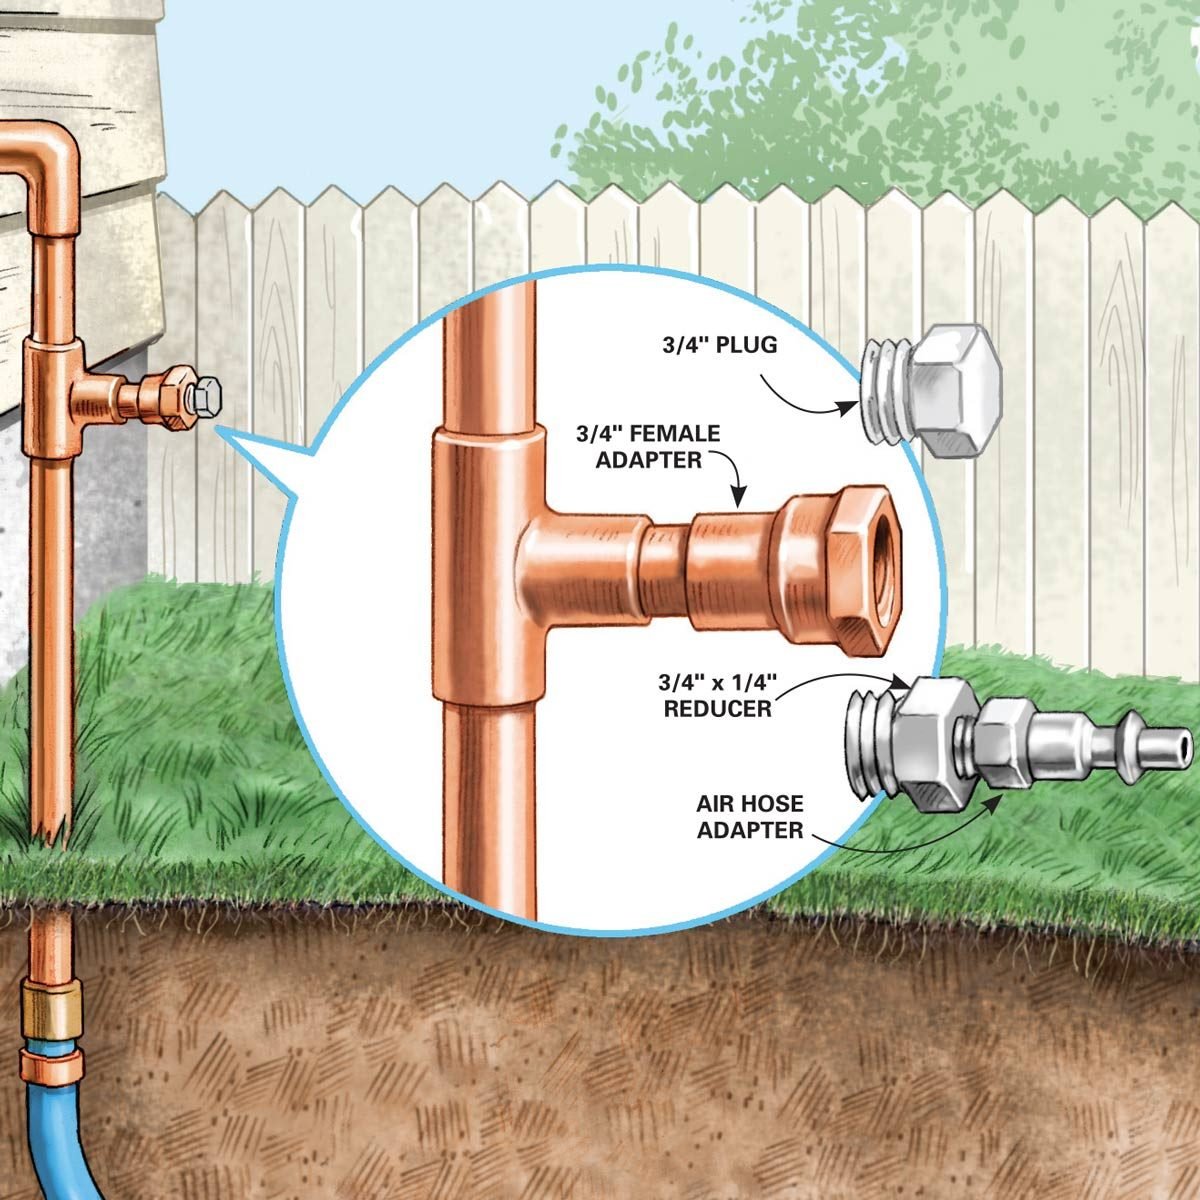 How To Install An Outdoor Faucet Family Handyman